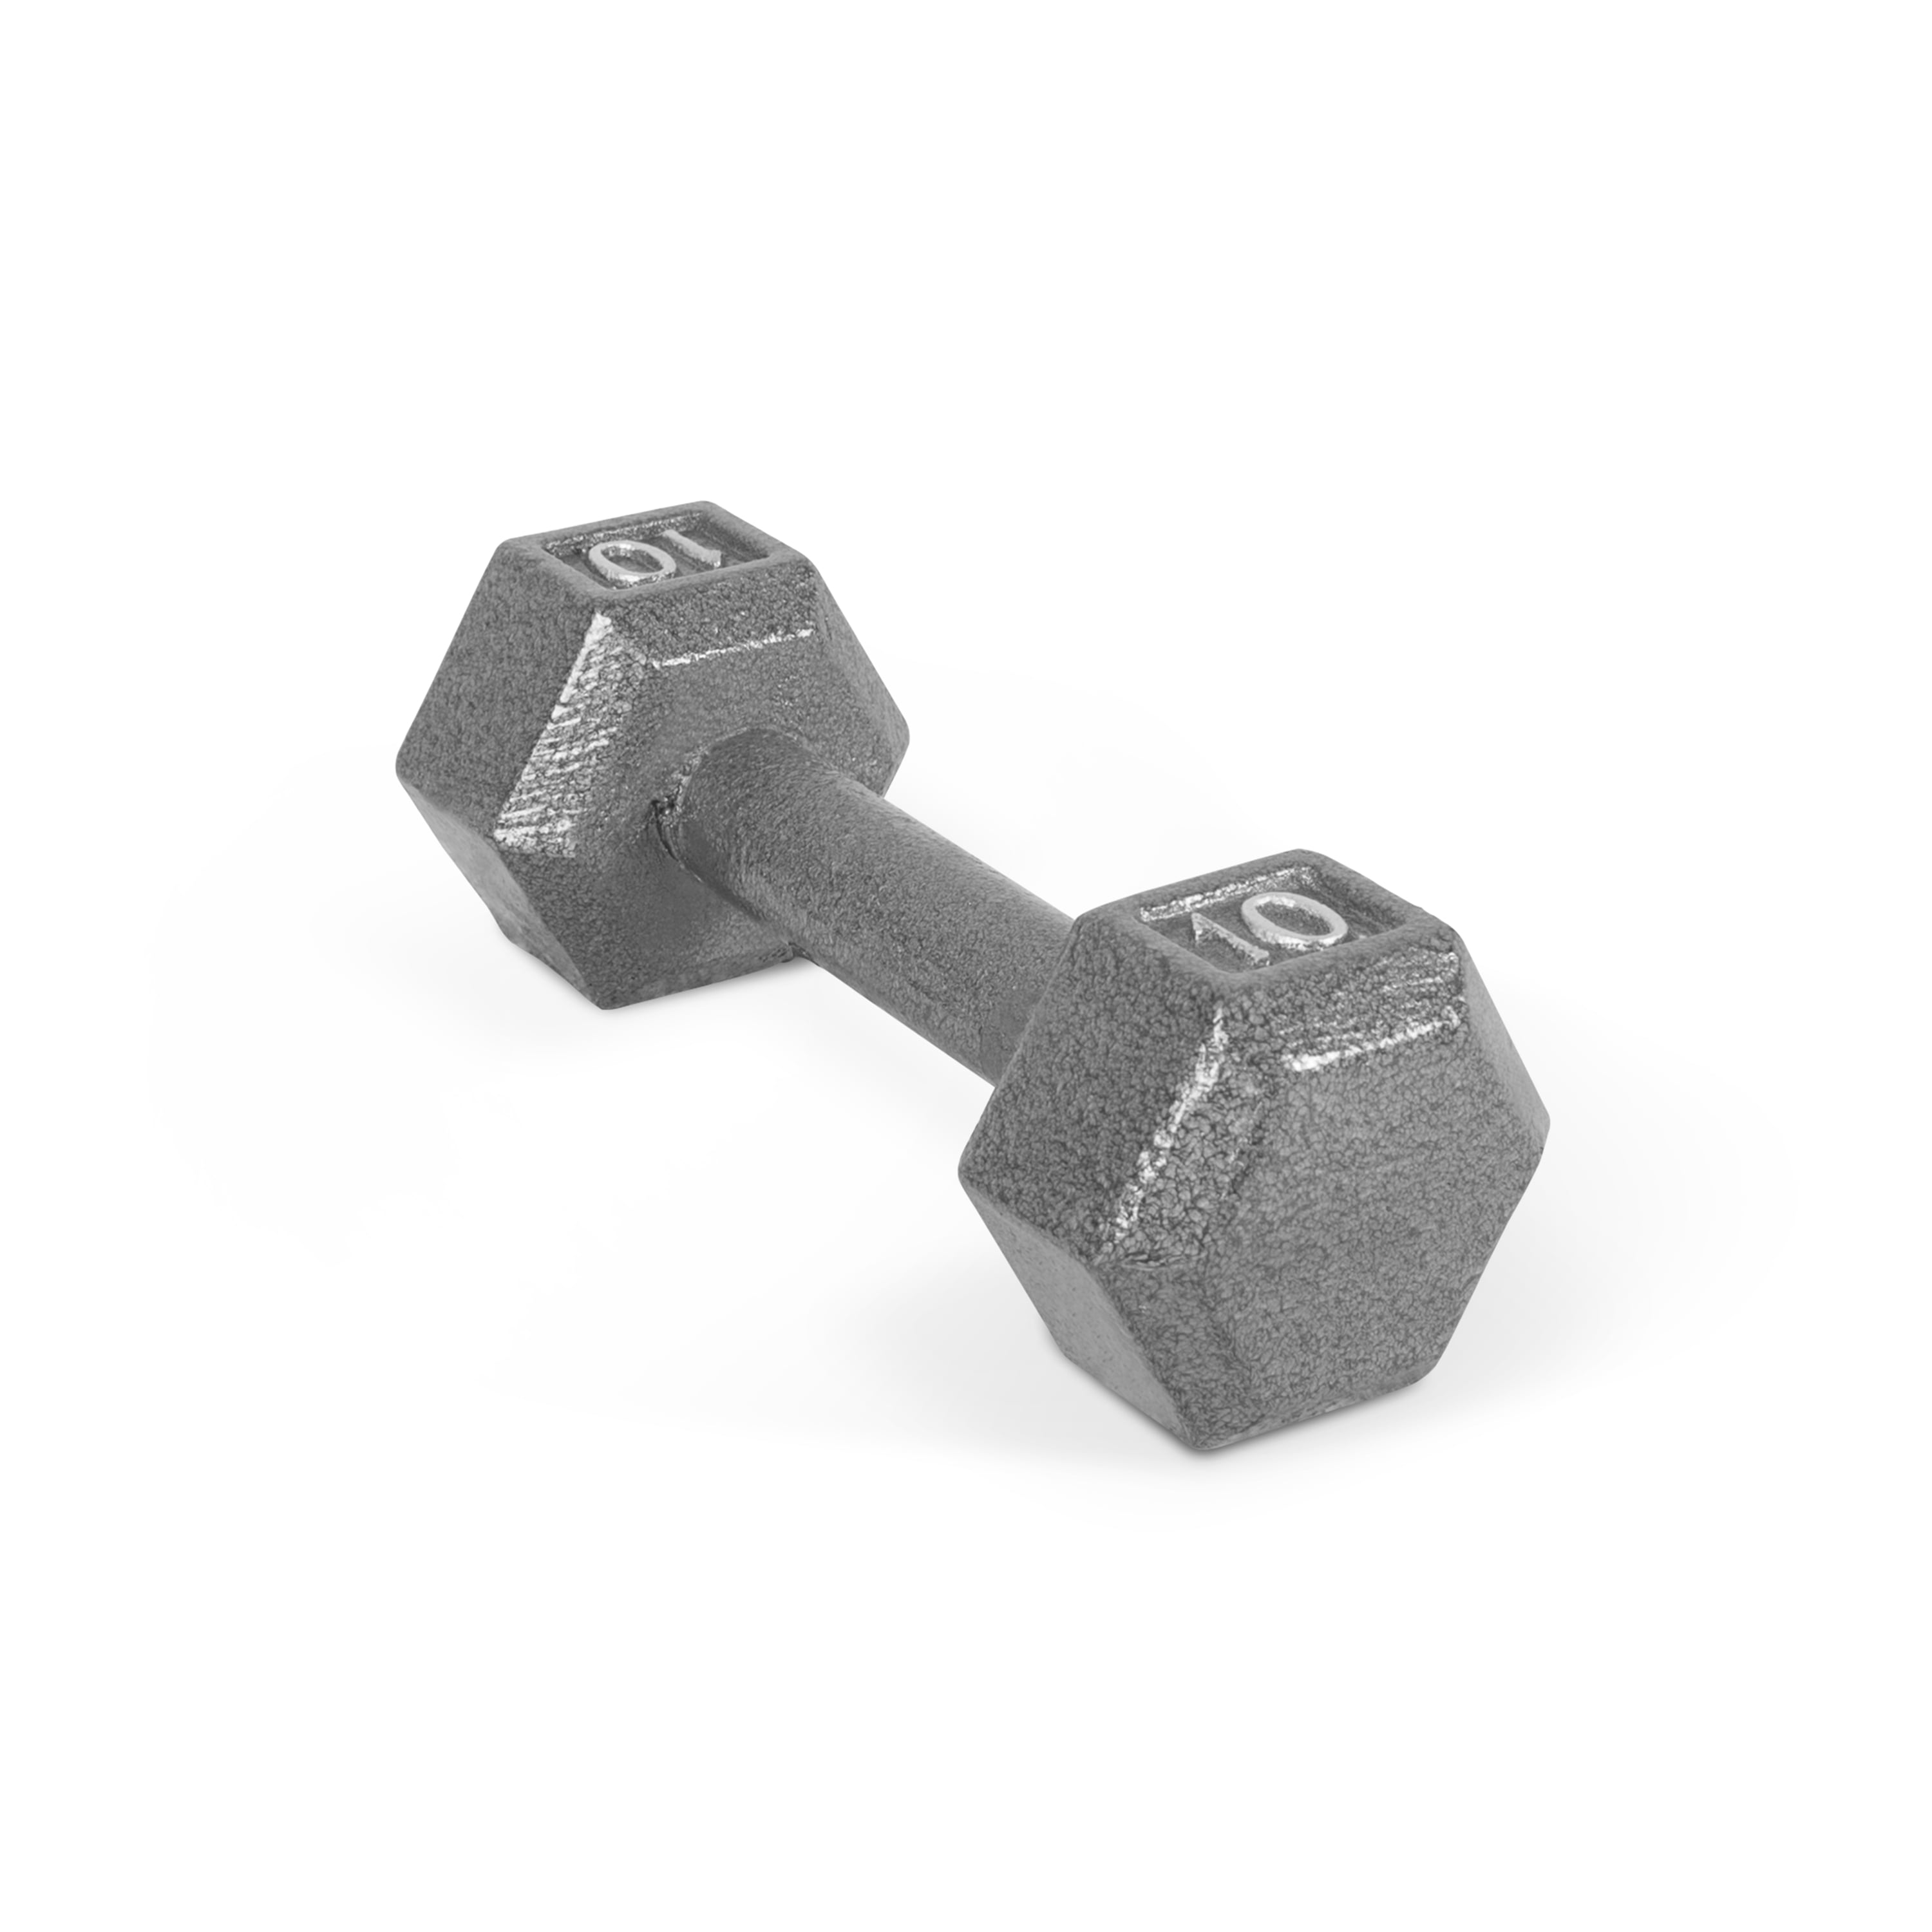 CAP Neoprene Dumbbell 10lb Single Gray Hex Weight Workout 10 Pounds Dumbell 